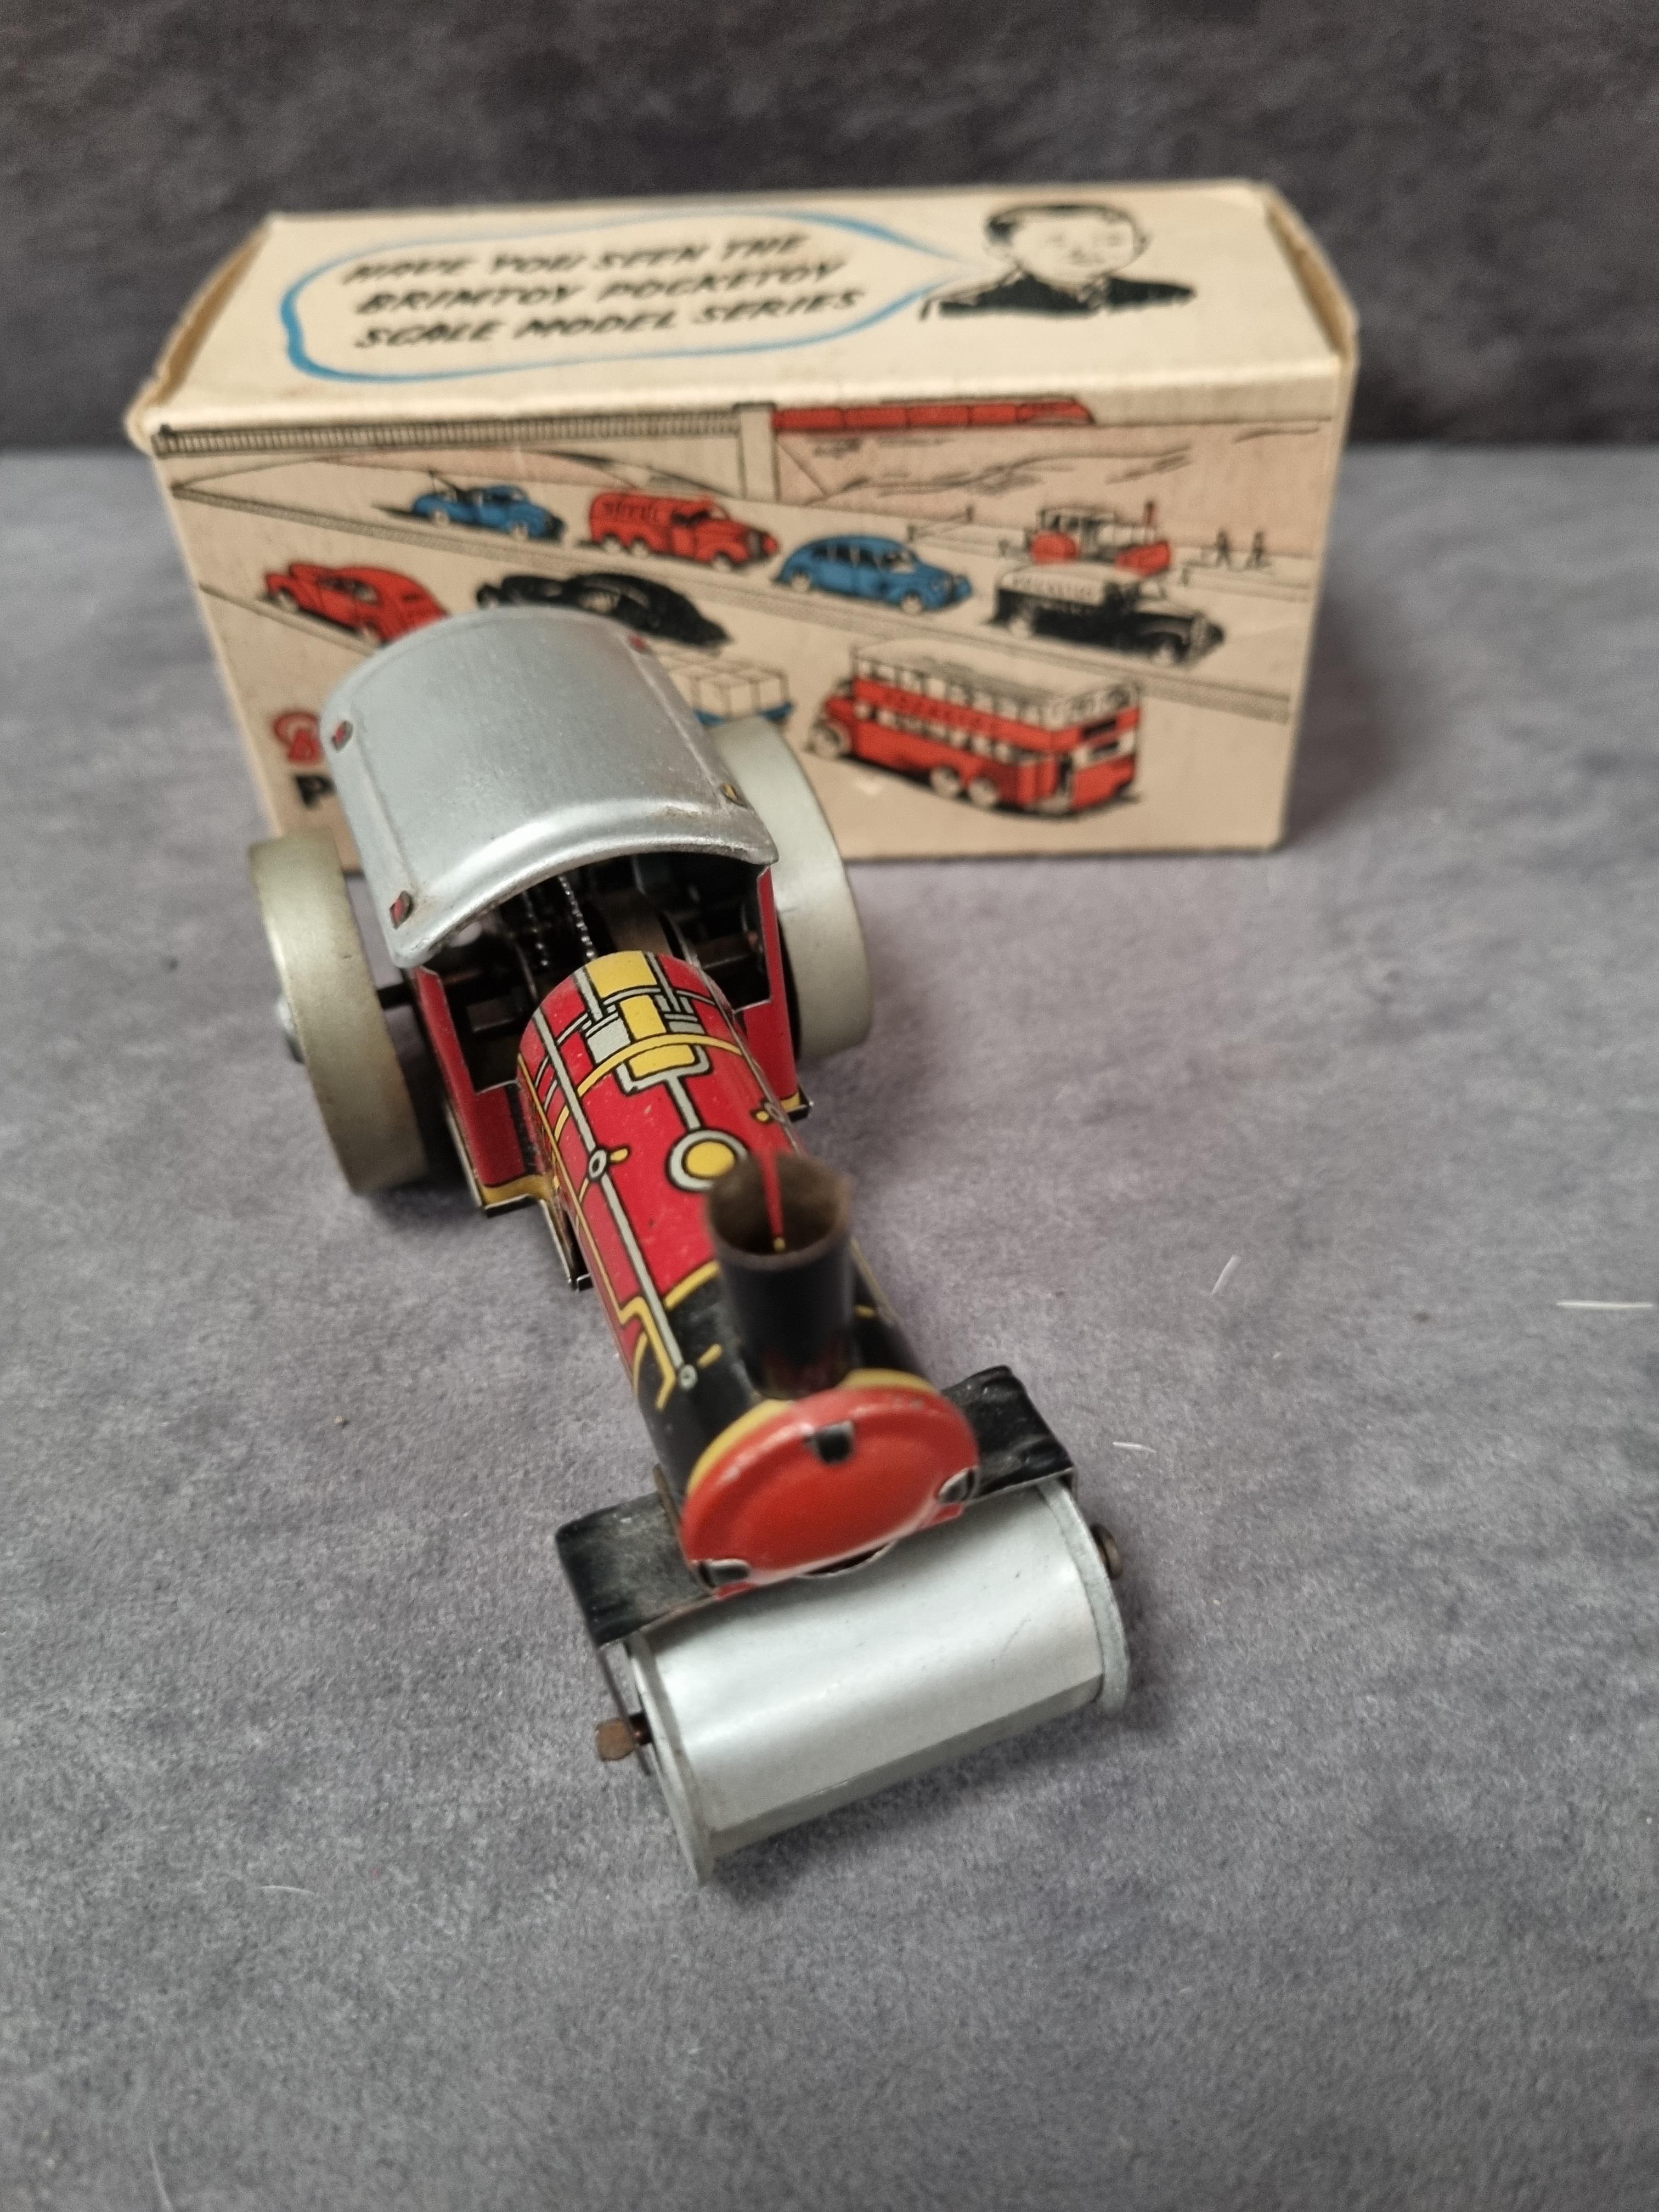 Brimtoy pocket toy 9/501mechanical steam roller tin plate with key in box